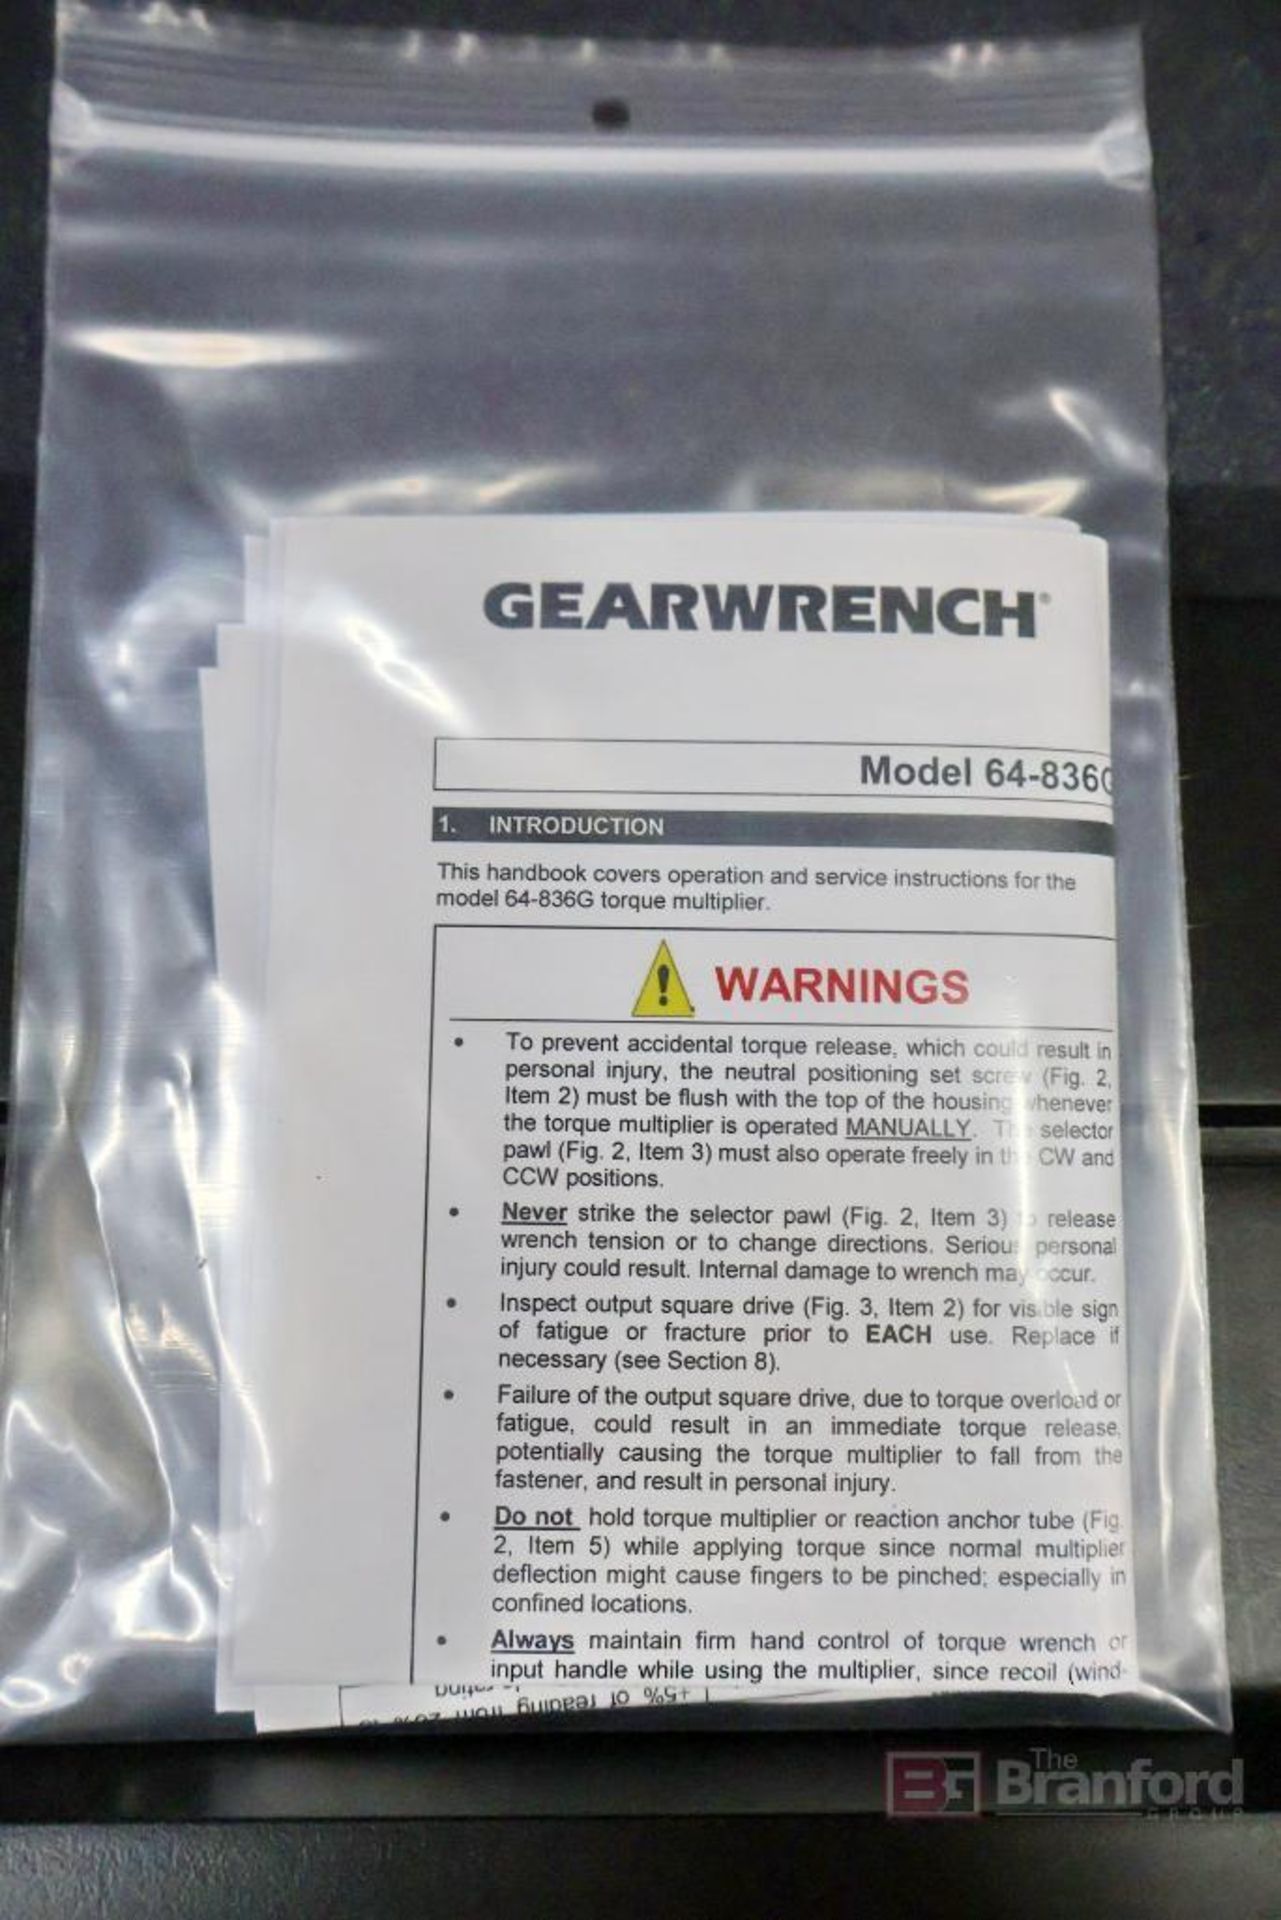 GearWrench 64-836G Torque Multiplier - Image 7 of 9